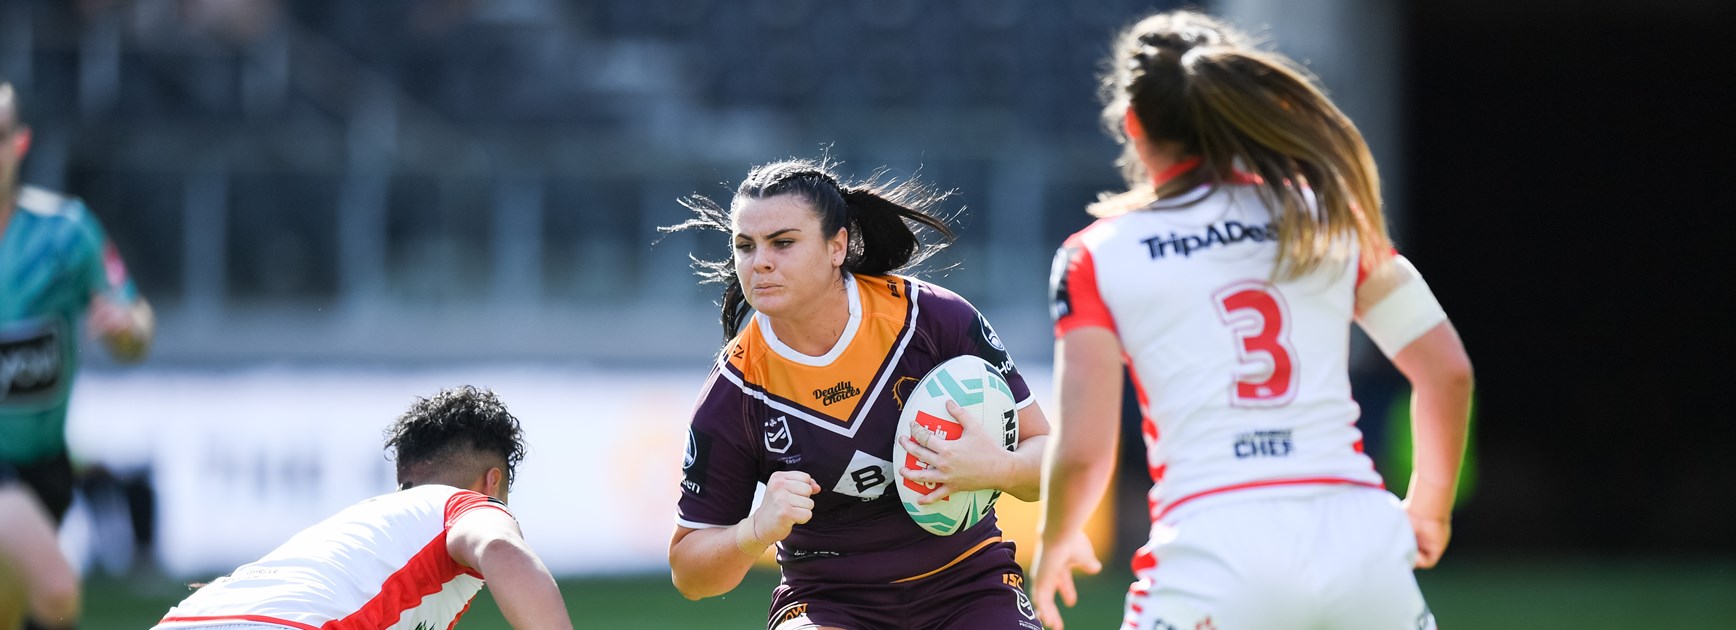 Broncos coach Wright lauds side's grittiness in NRLW win